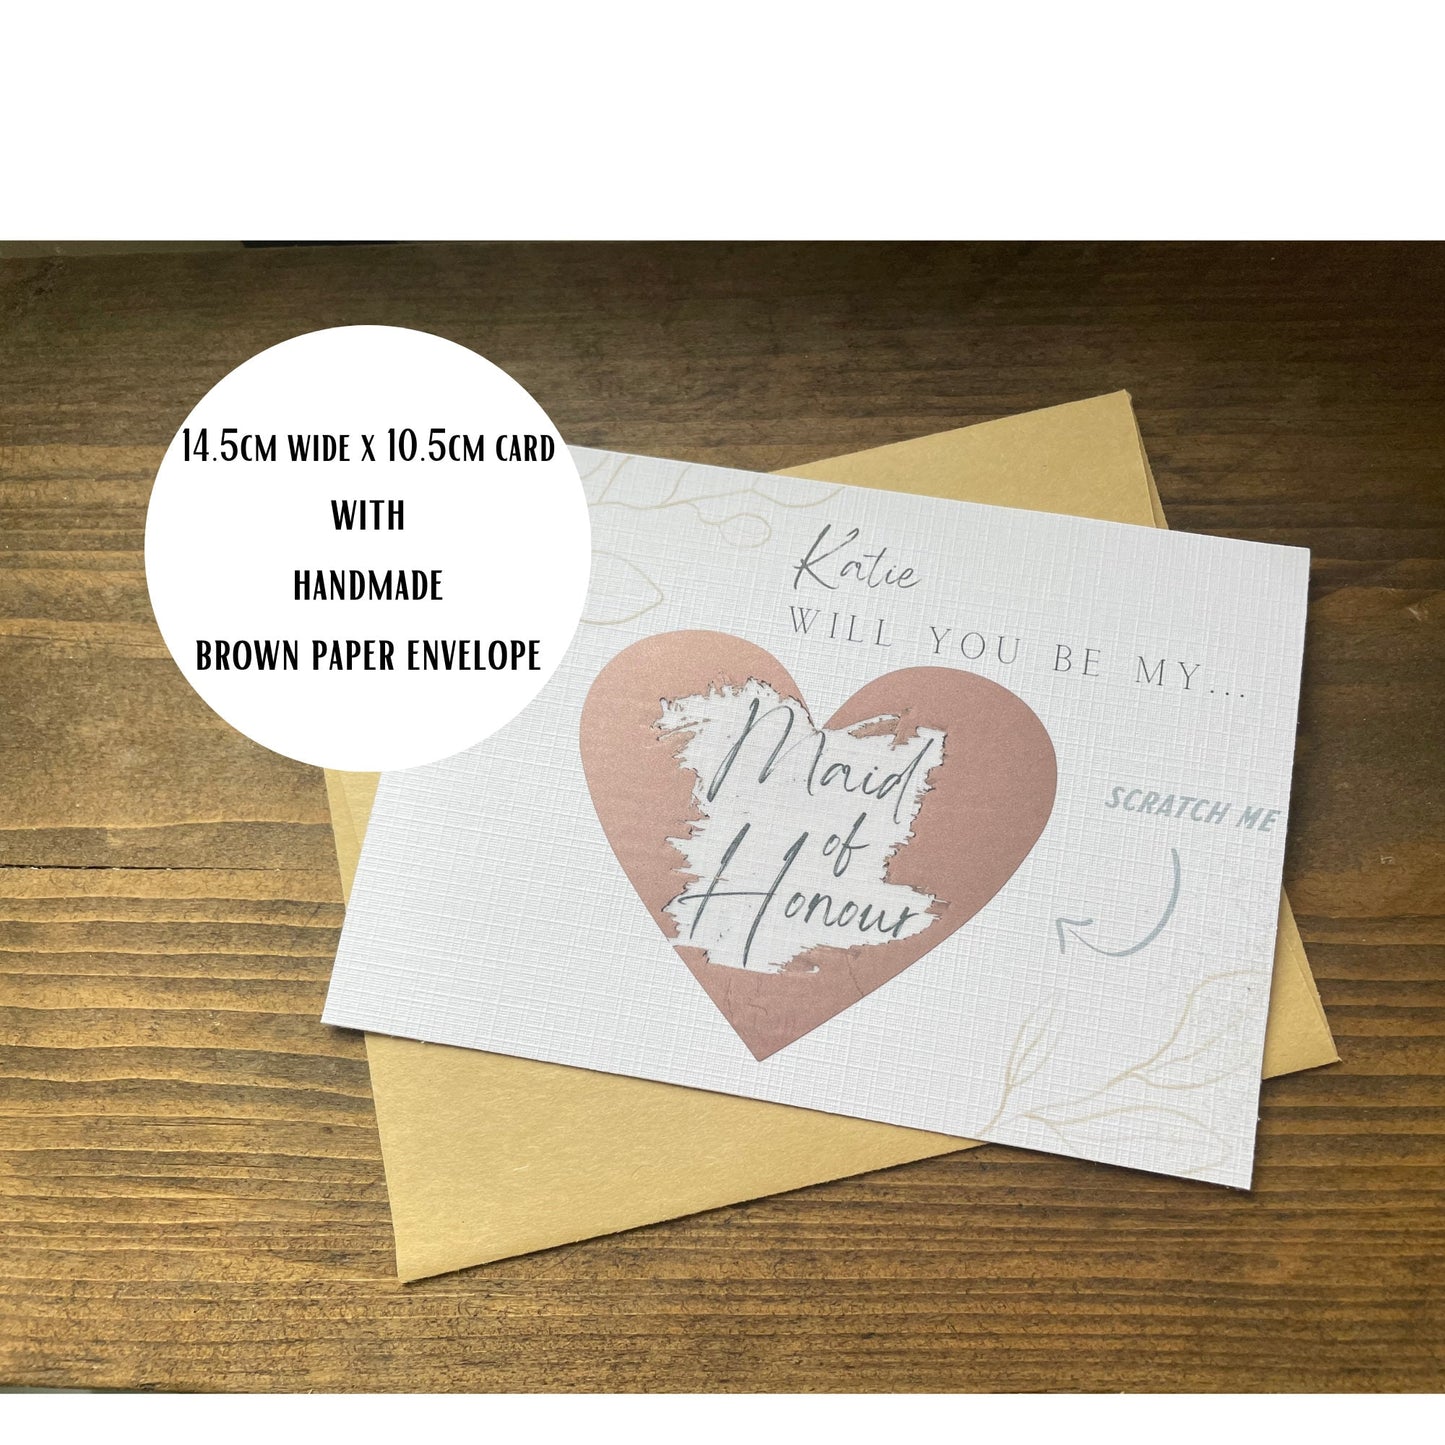 Personalised Heart-Shaped Scratch-Off Bridesmaid Proposal Cards: Nude Colour